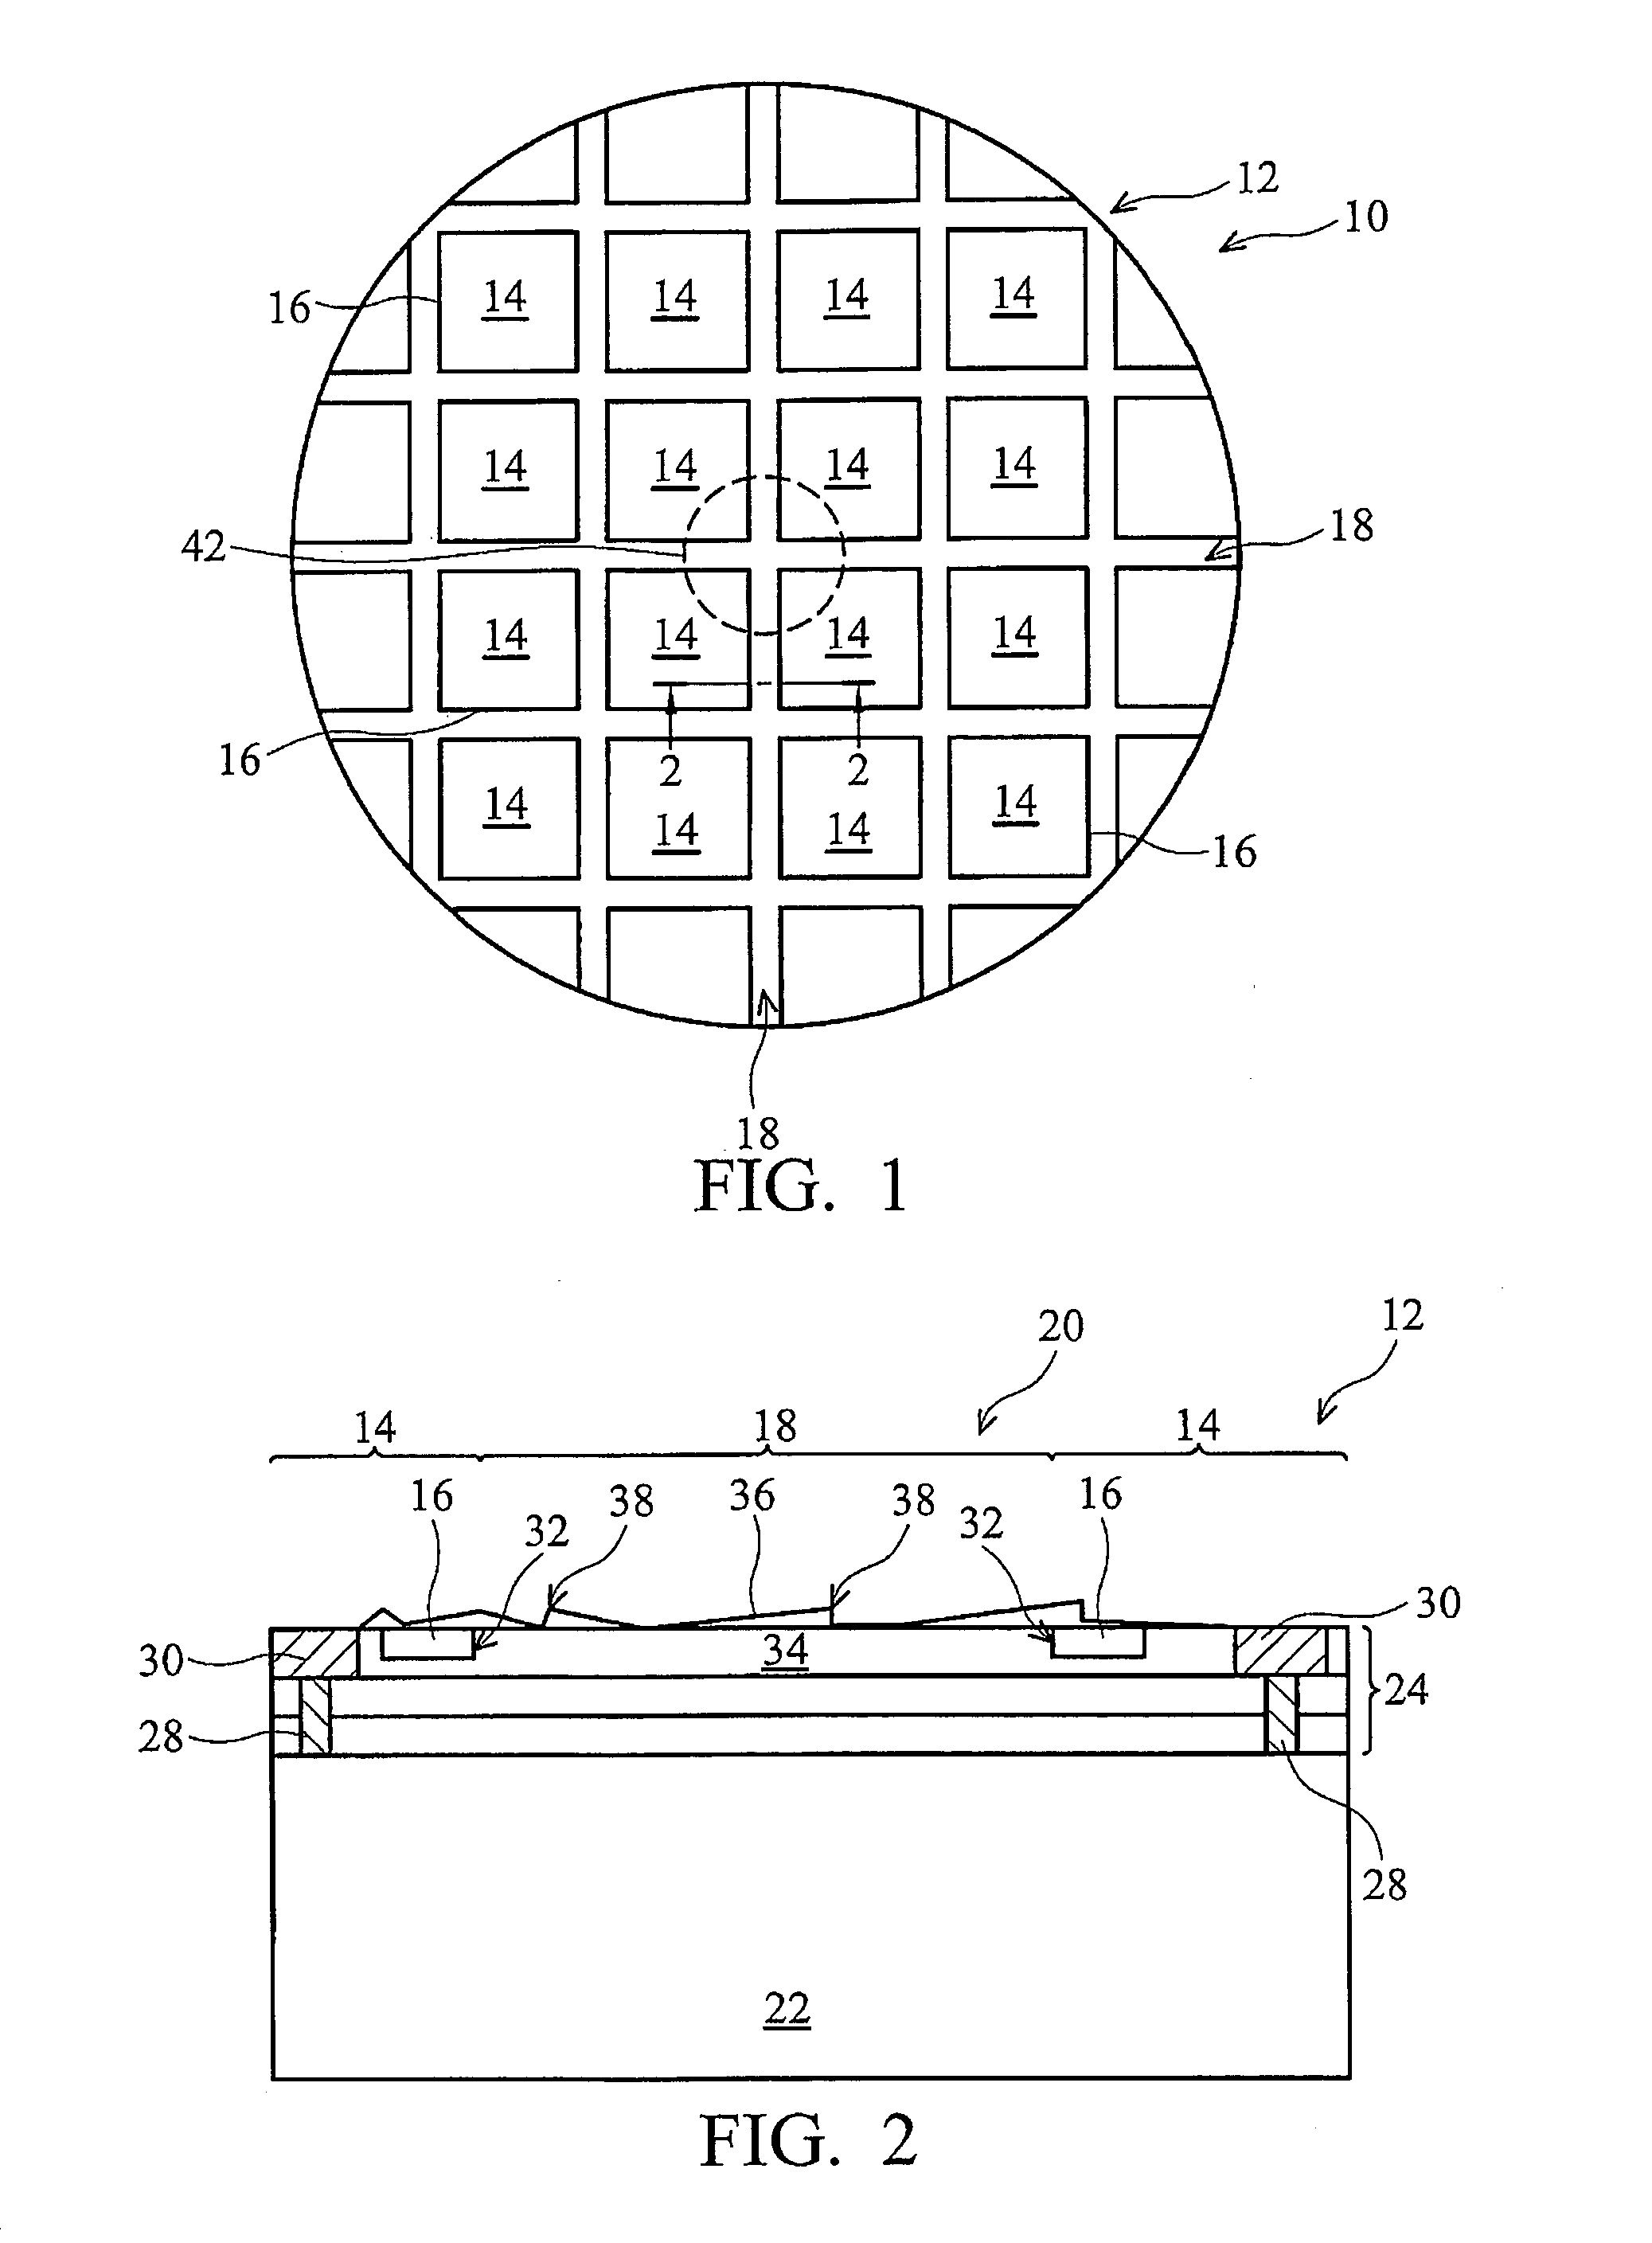 Method of cutting integrated circuit chips from wafer by ablating with laser and cutting with saw blade